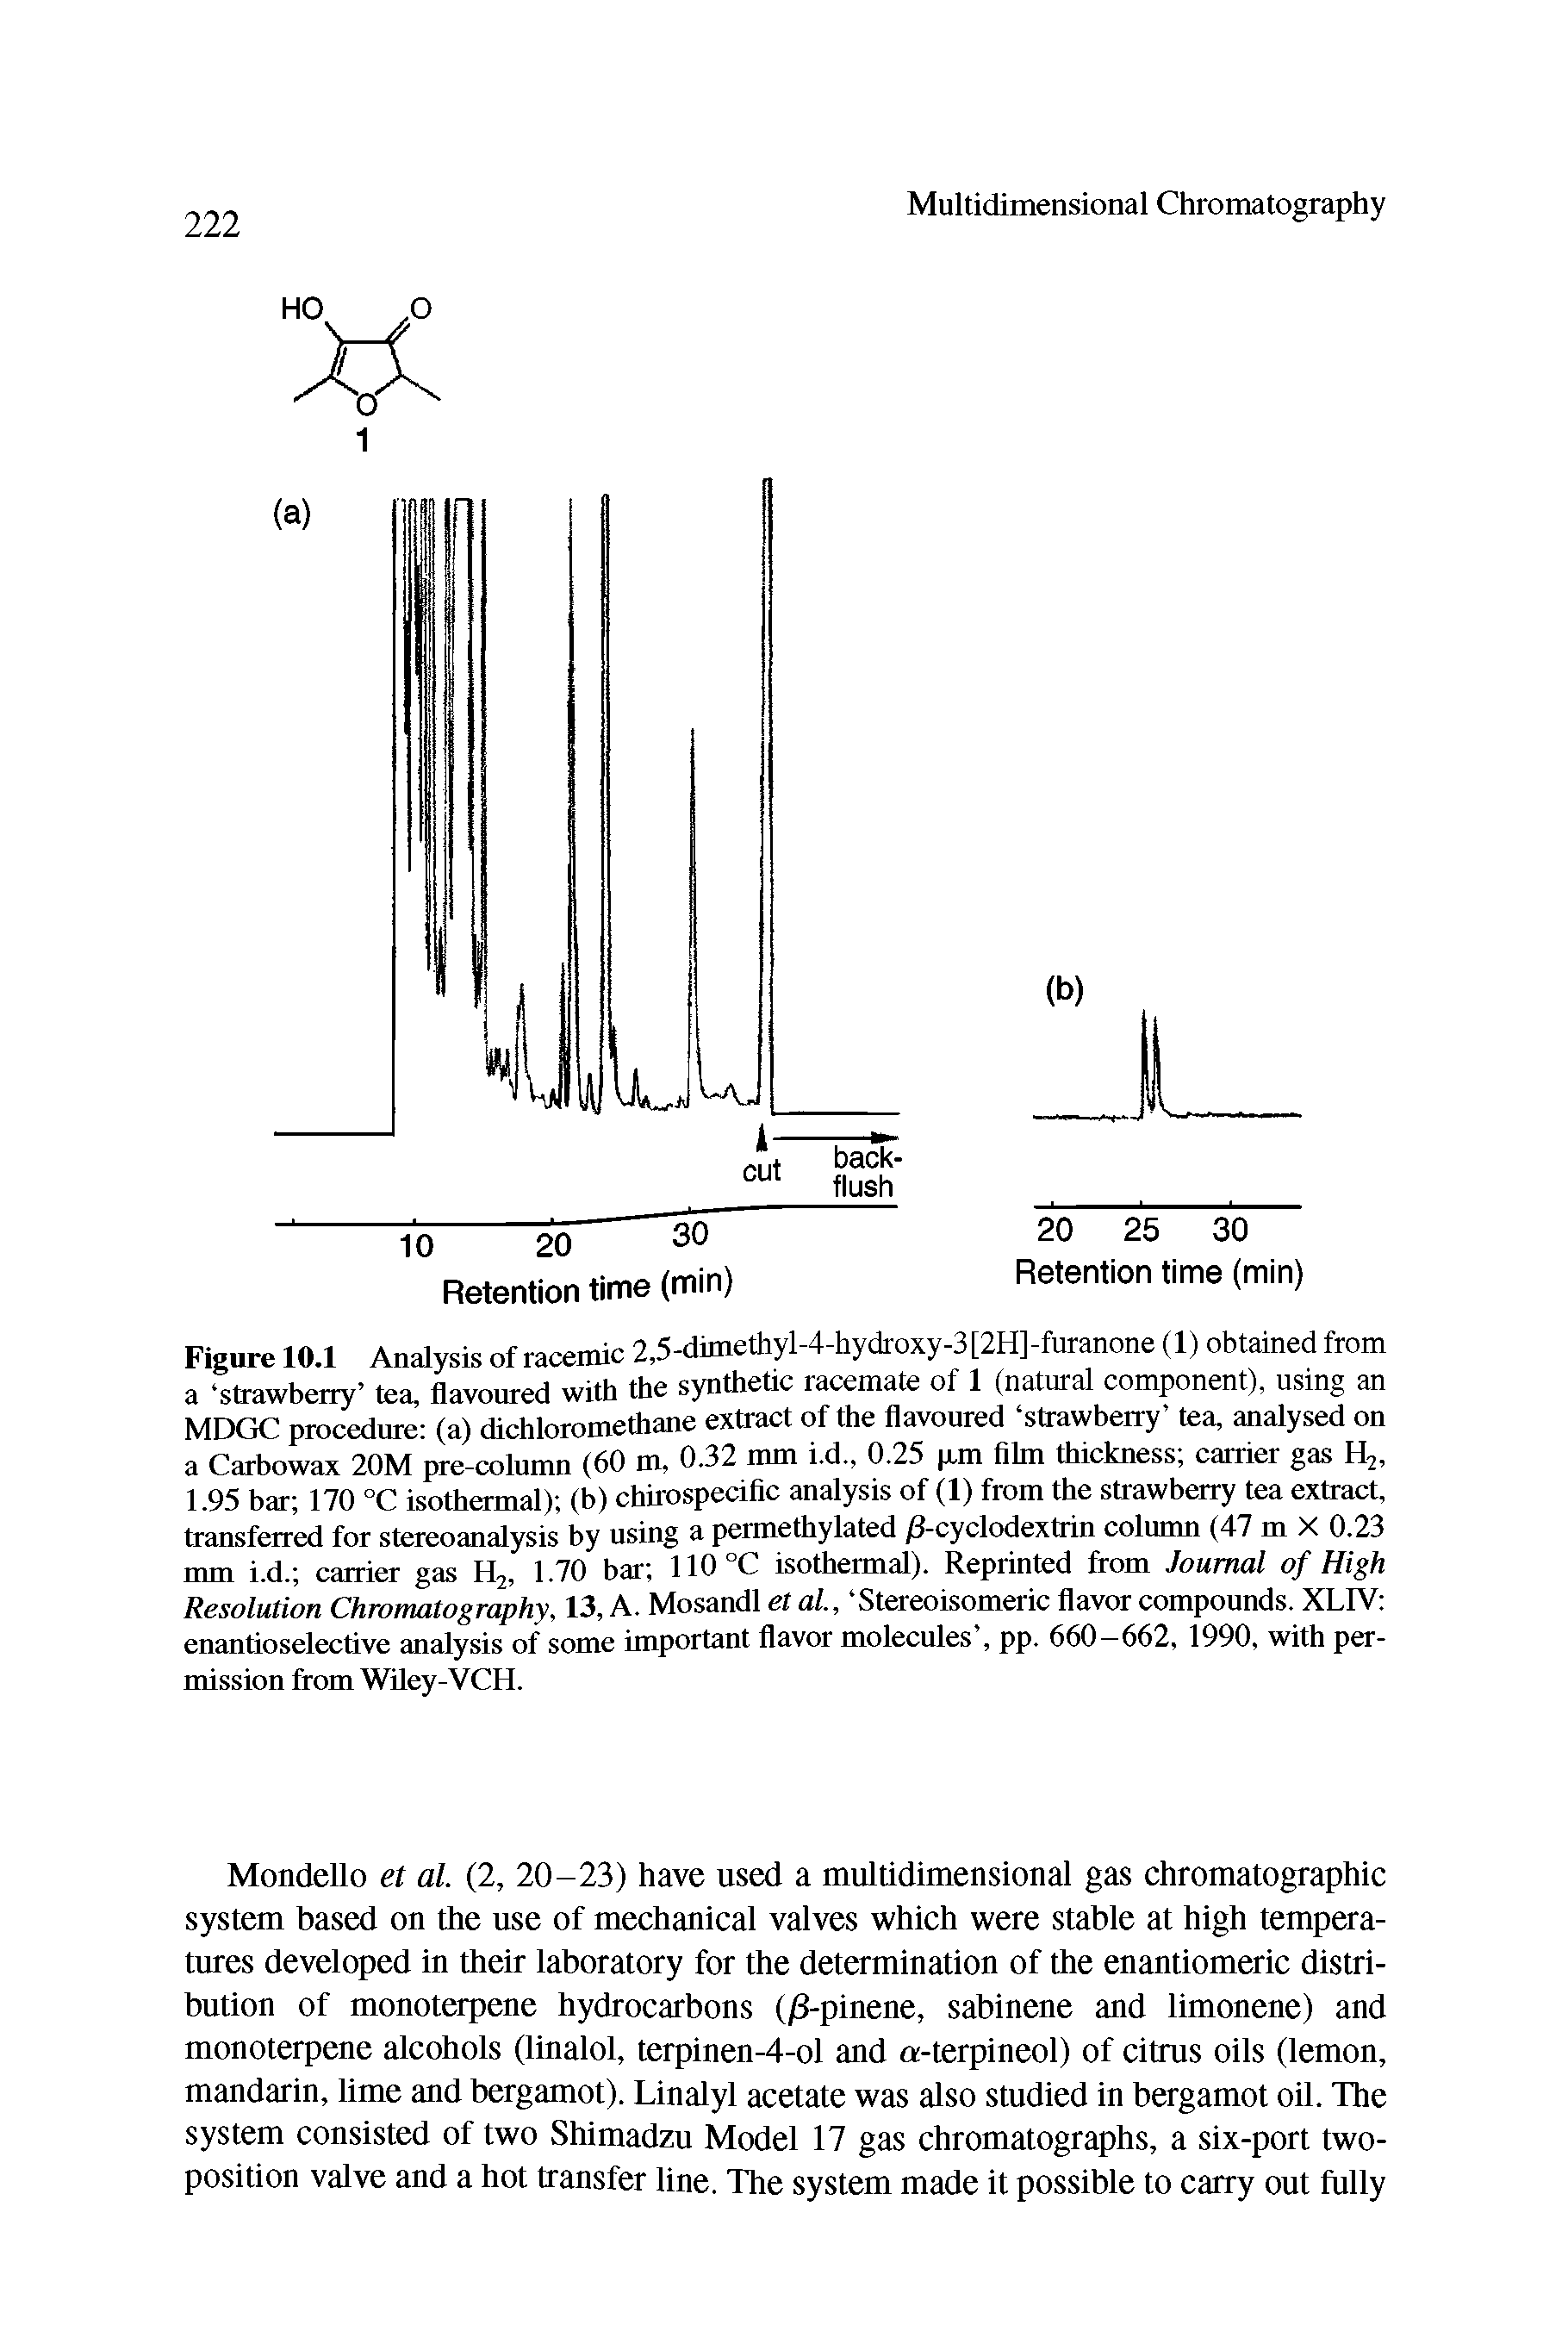 Figure 10.1 Analysis of racemic 2,5-dimethyl-4-hydroxy-3[2H]-furanone (1) obtained from a strawberry tea, flavoured with the synthetic racemate of 1 (natural component), using an MDGC procedure (a) dichloromethane extract of the flavoured strawberry tea, analysed on a Carbowax 20M pre-column (60 m, 0.32 mm i.d., 0.25 pan film thickness carrier gas H2, 1.95 bar 170 °C isothermal) (b) chirospecific analysis of (1) from the strawberry tea extract, transferred for stereoanalysis by using a permethylated /1-cyclodextrin column (47 m X 0.23 mm i.d. carrier gas H2, 1.70 bar 110°C isothermal). Reprinted from Journal of High Resolution Chromatography, 13, A. Mosandl et al., Stereoisomeric flavor compounds. XLIV enantioselective analysis of some important flavor molecules , pp. 660-662, 1990, with permission from Wiley-VCH.